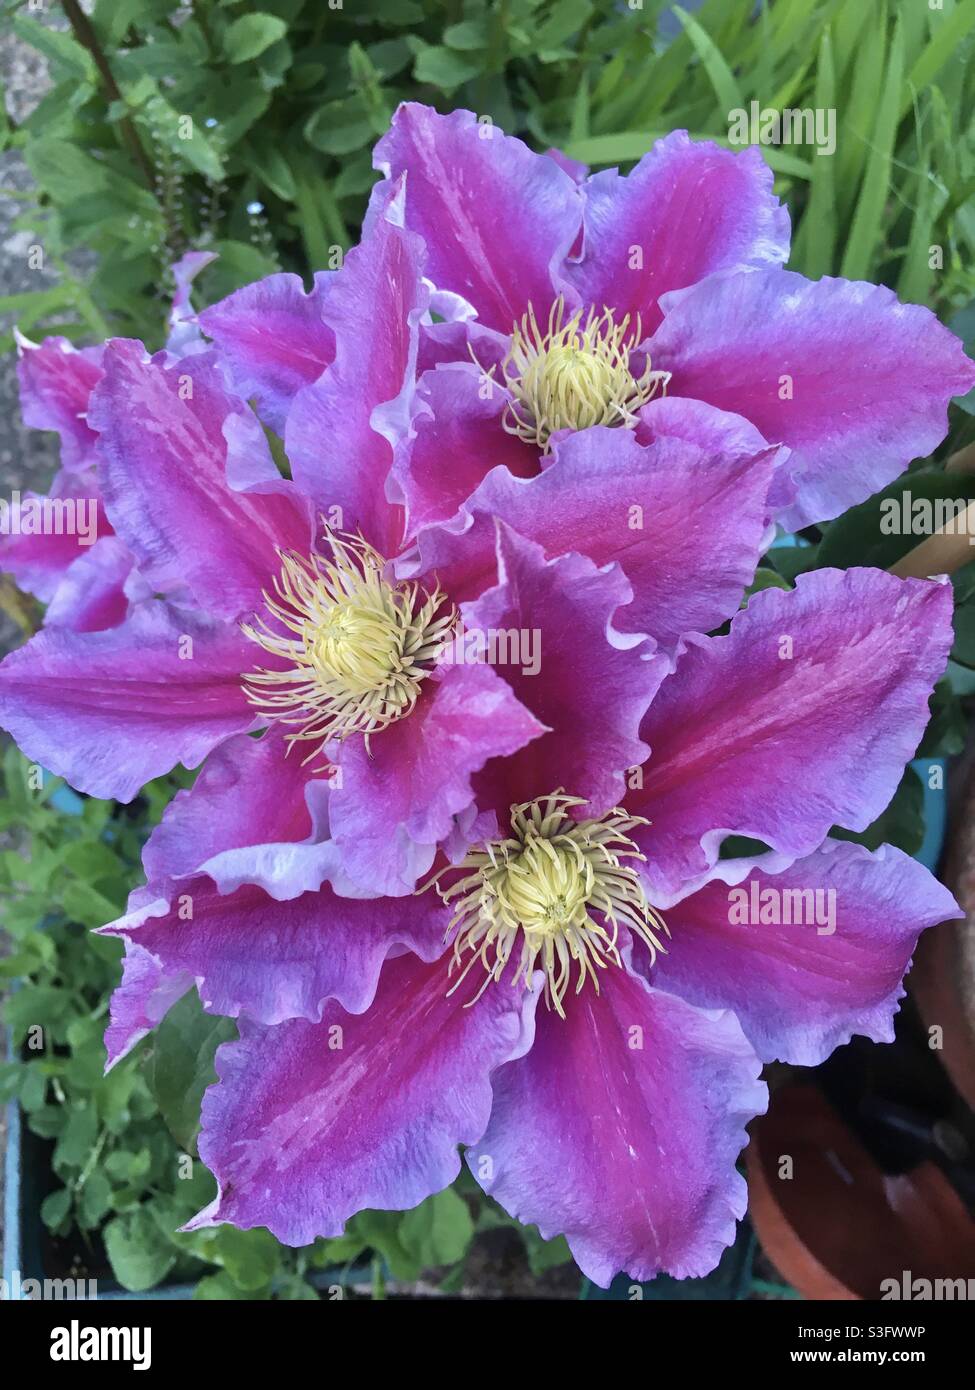 Clematis in full bloom Stock Photo